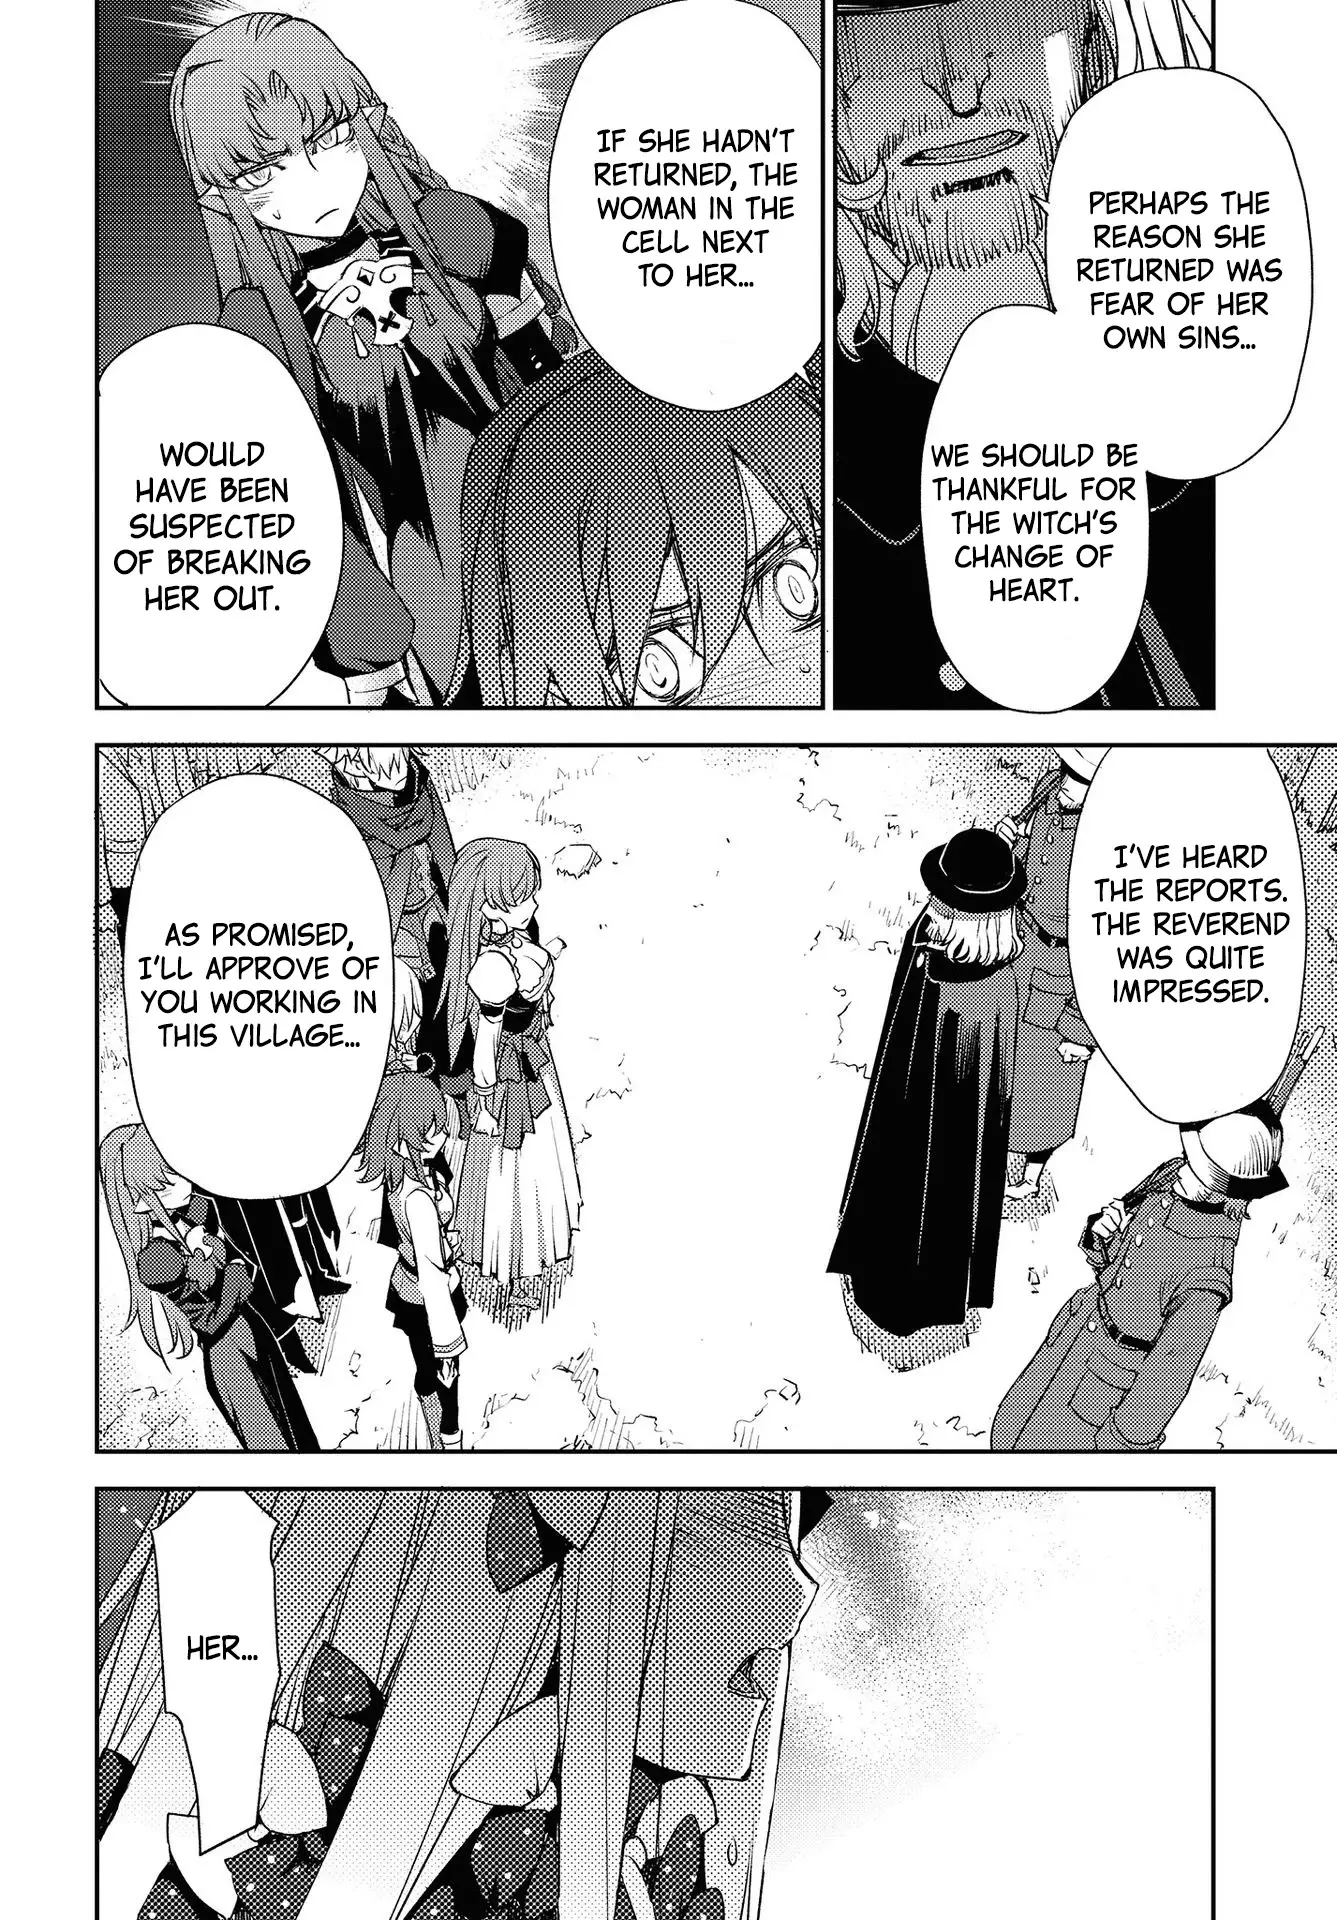 Fate/grand Order: Epic Of Remnant - Subspecies Singularity Iv: Taboo Advent Salem: Salem Of Heresy - 15 page 4